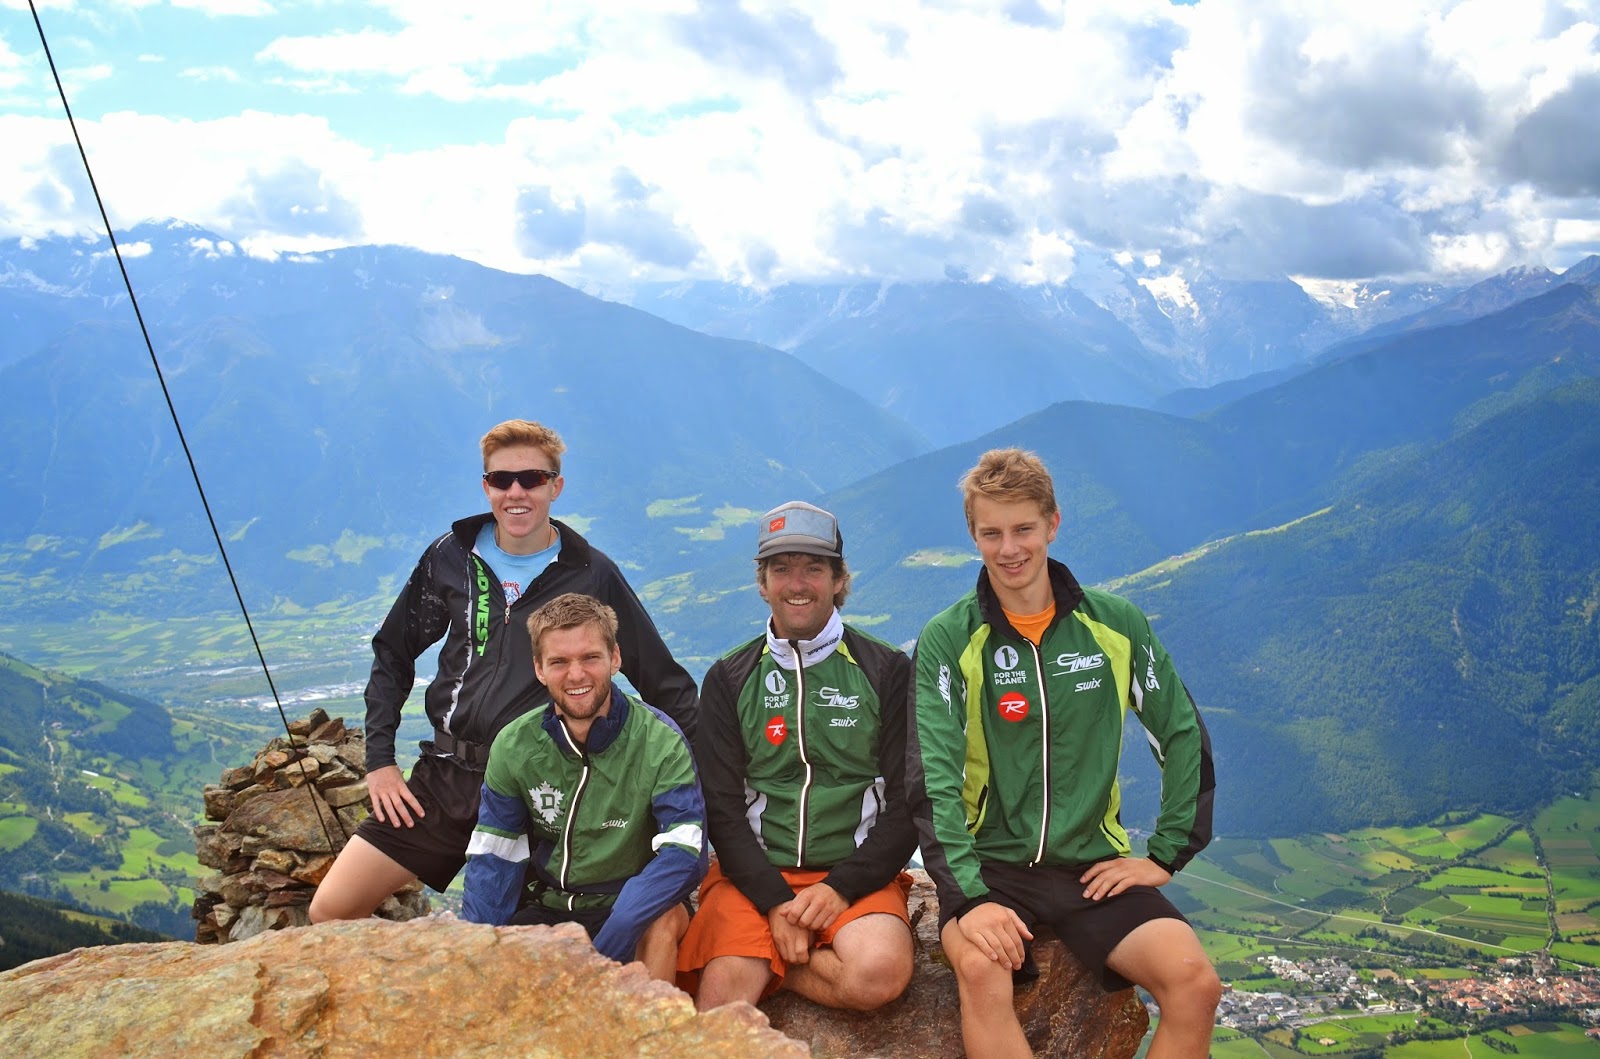 GMVS elite and postgraduate athletes Nick Gardner, David Sinclair, GMVS head coach Justin Beckwith, and Ian Moore (l-r) during their September trip to Italy. (Photo: GMVS) 